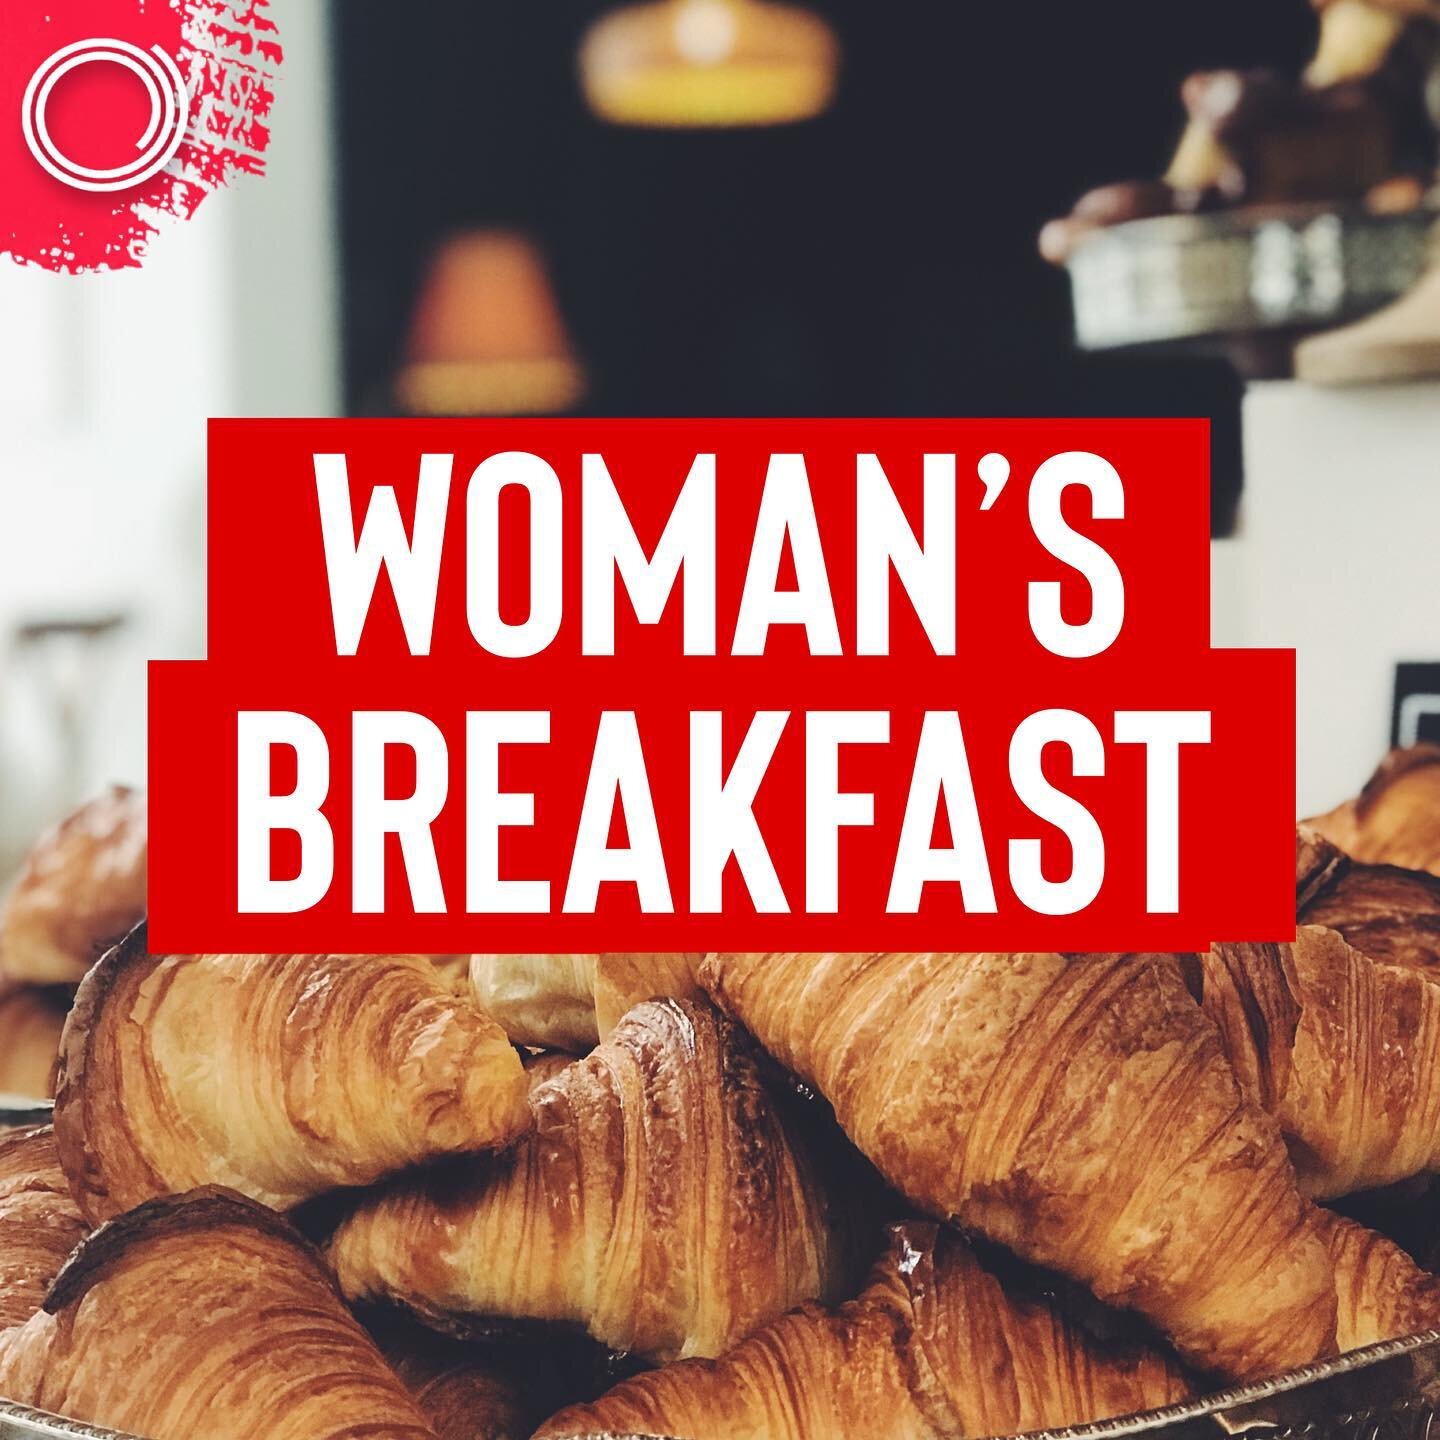 We are excited for our woman&rsquo;s breakfast 10:30am this Saturday (April 22nd). Love to see you there. Every one is welcome.